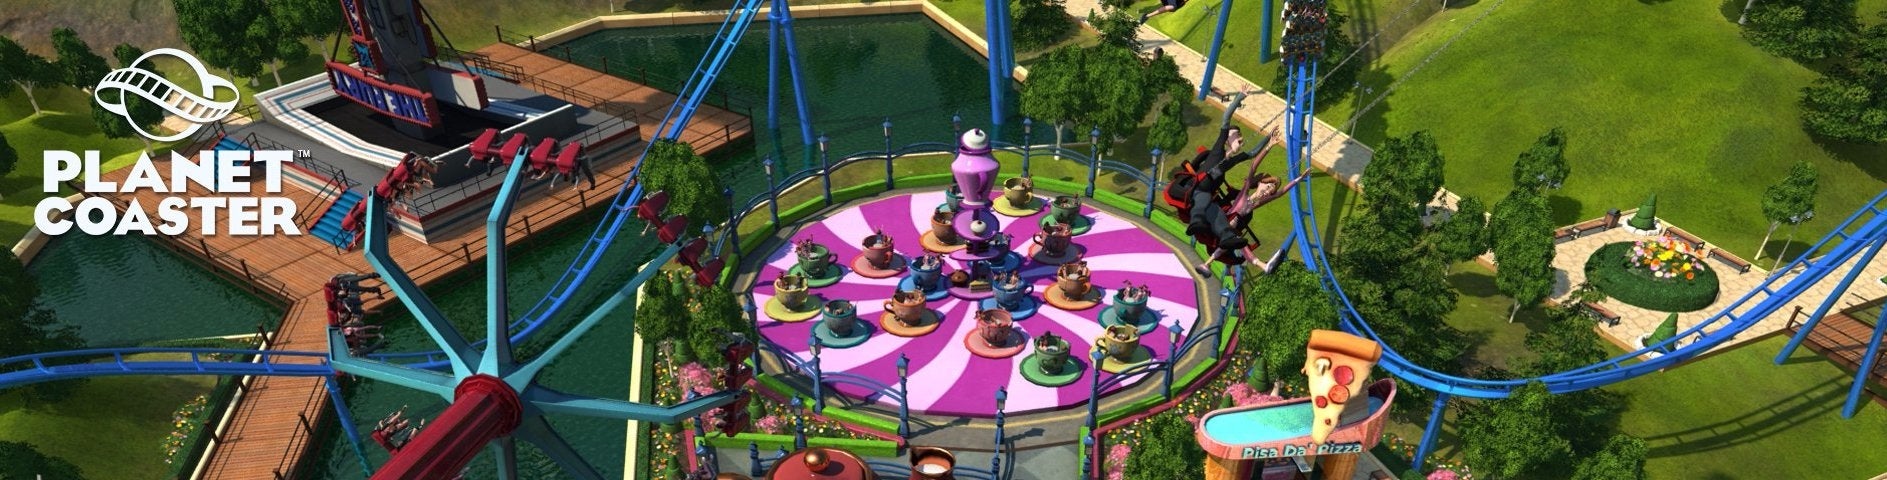 Image for Watch: How will Planet Coaster compare to Rollercoaster Tycoon 3?